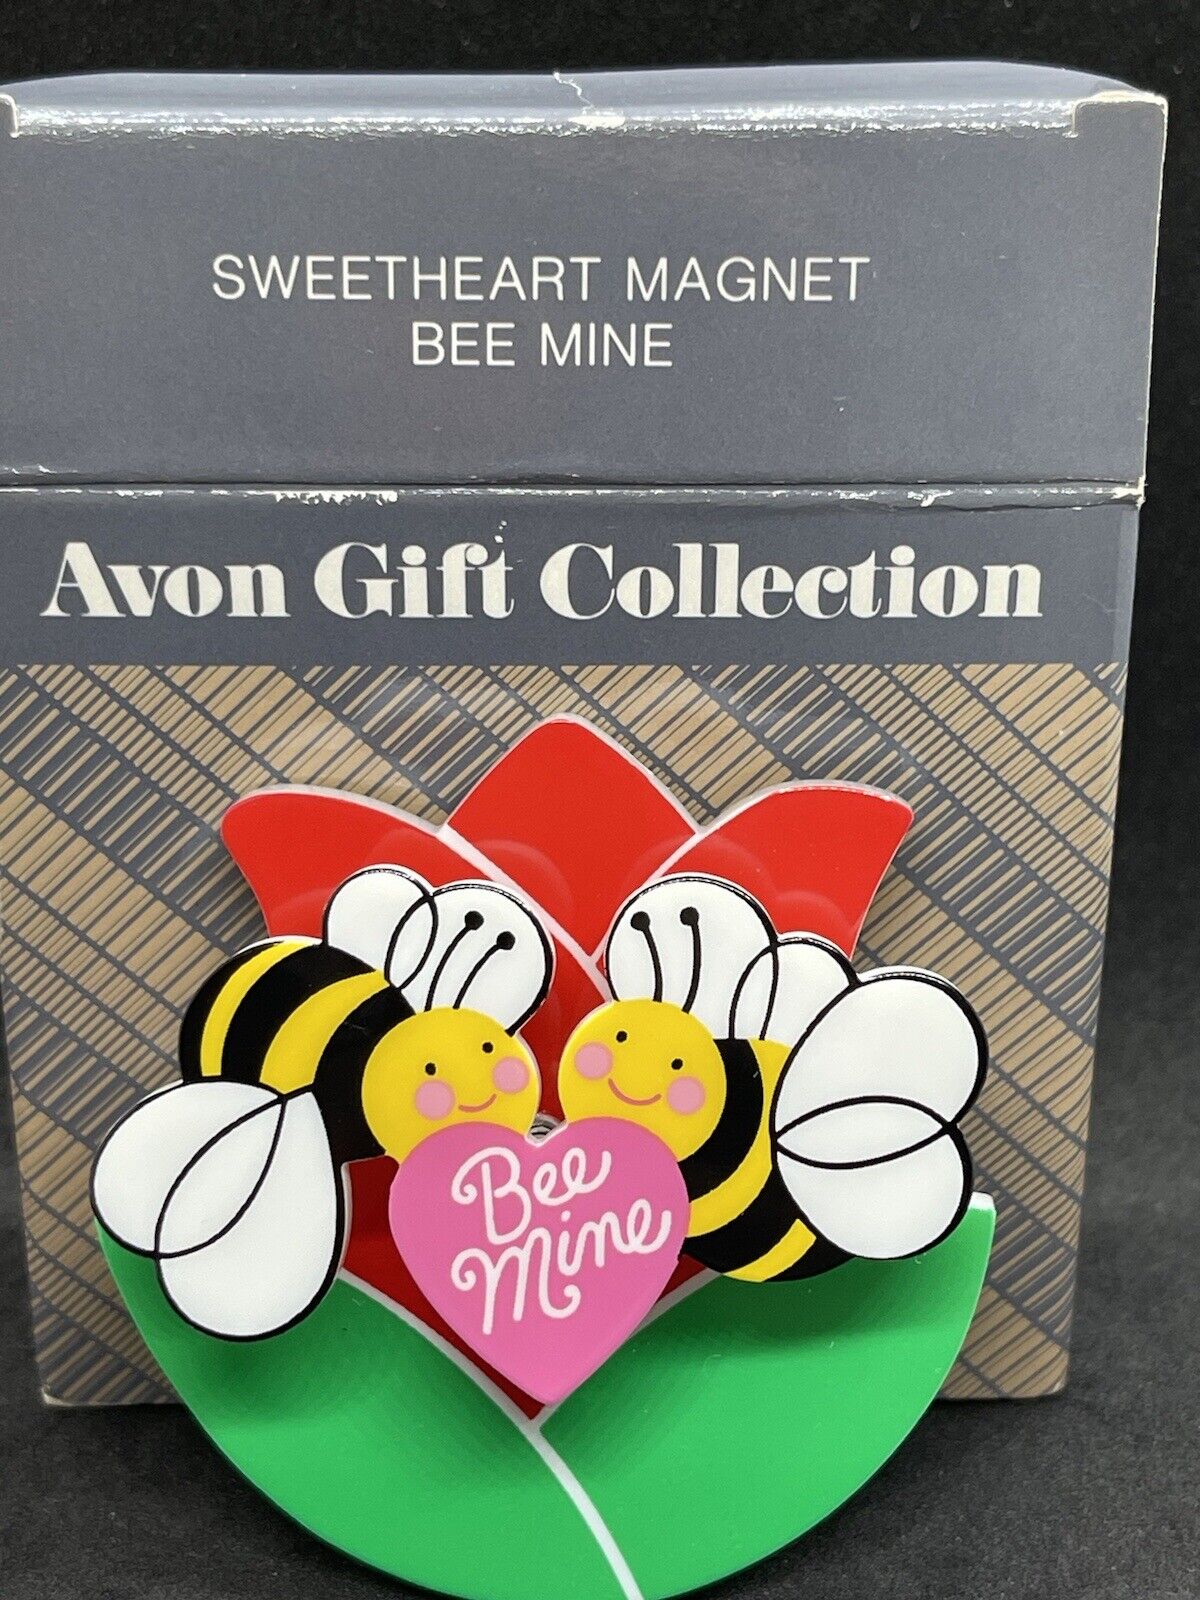 Vintage Avon Gift Collection Sweetheart Bee Mine Magnet NOS In Box 1980s